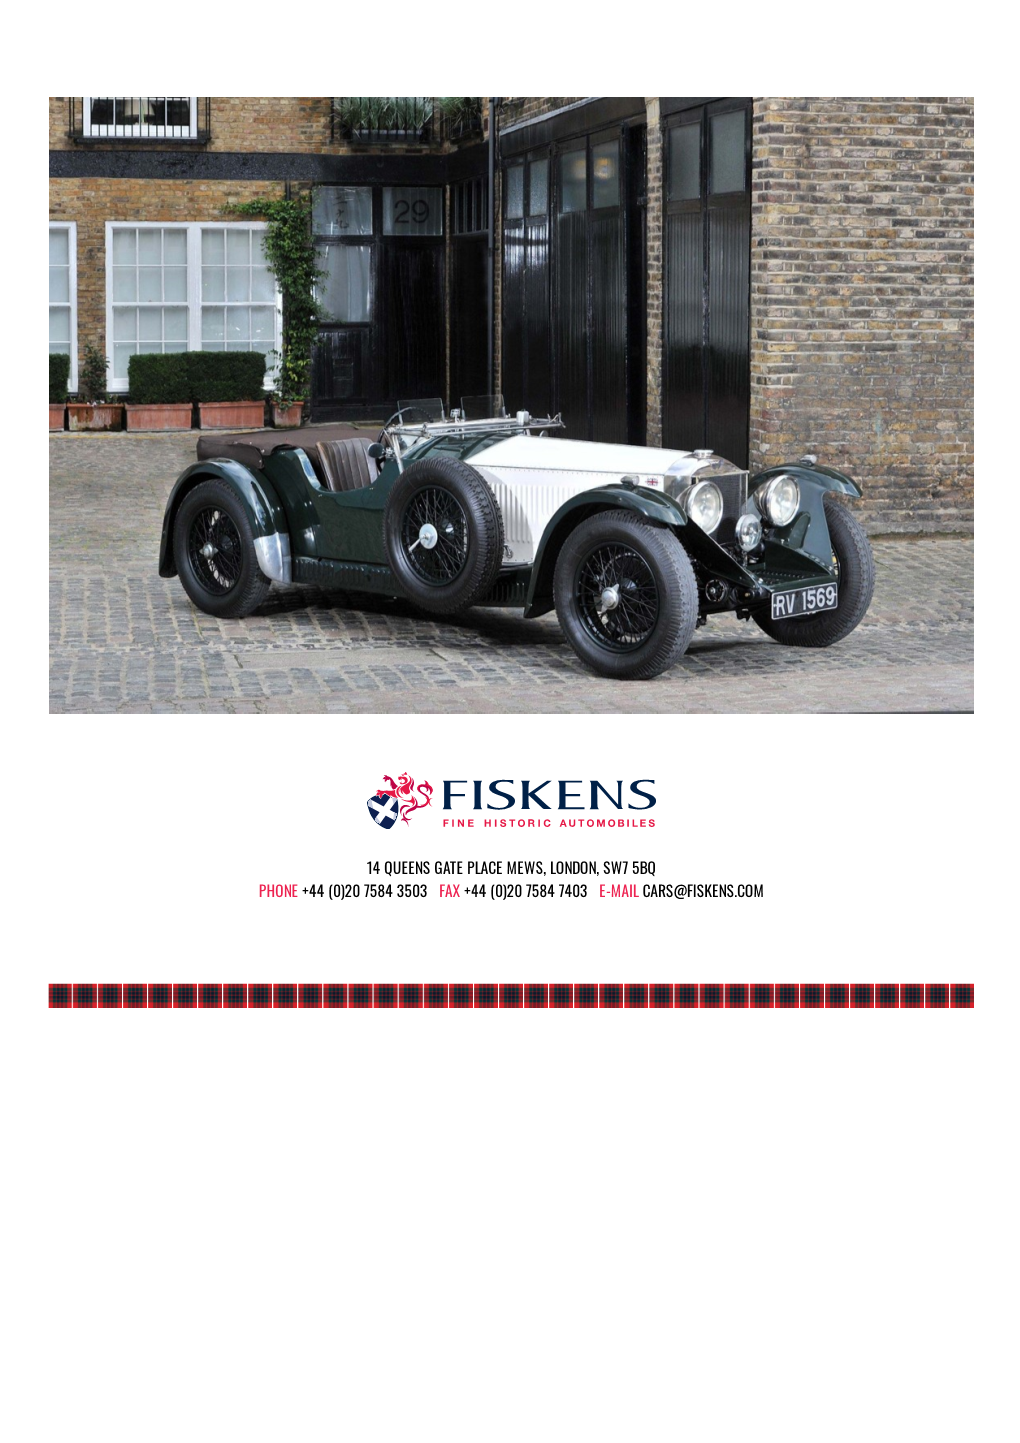 20 7584 7403 E-Mail Cars@Fiskens.Com 1932 Invicta 4.5 Litre Low-Chassis S-Type